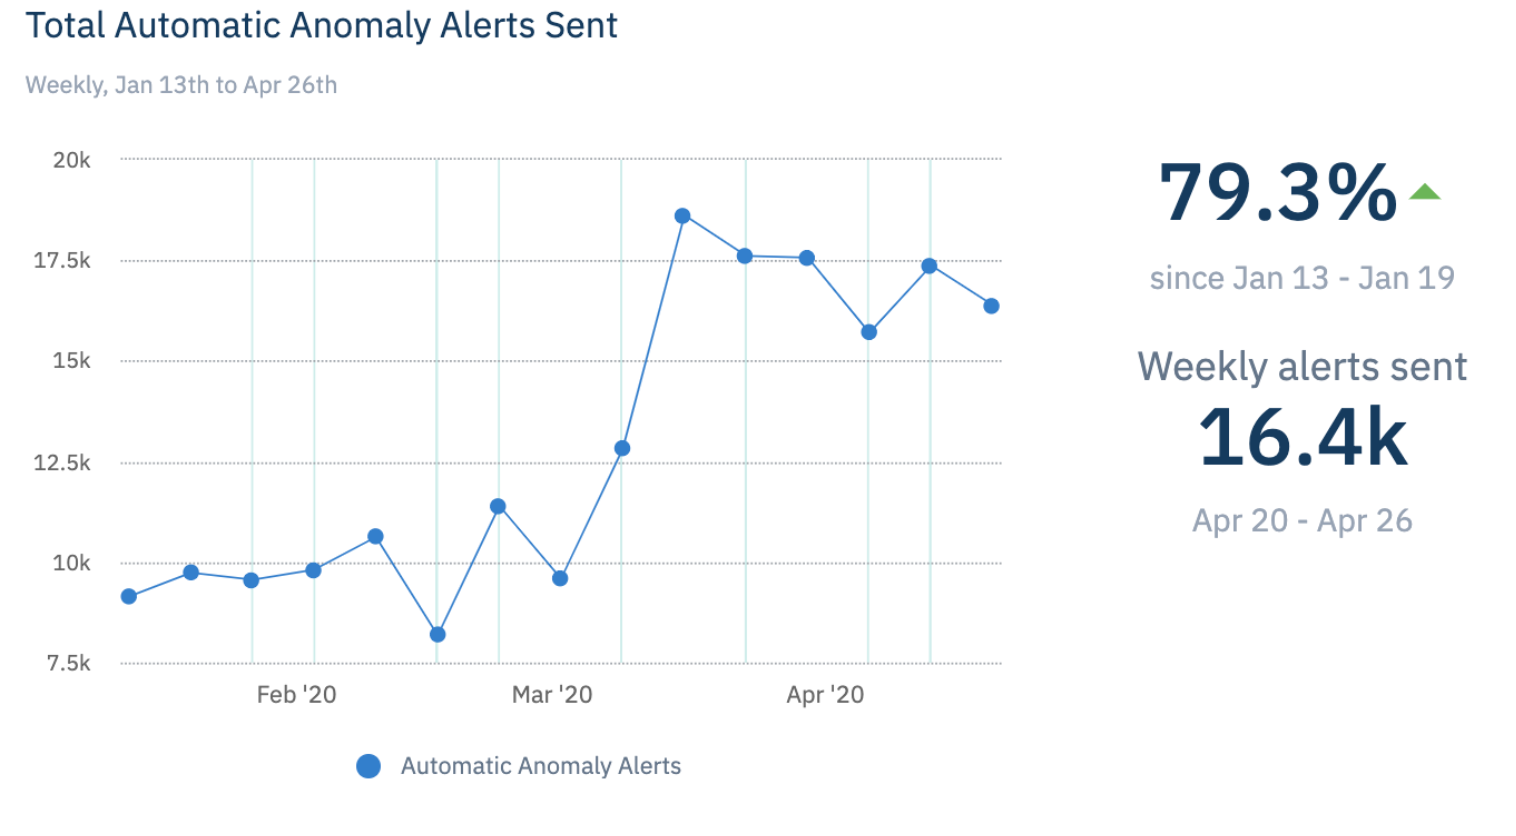 Increase in anomaly alerts sent by Amplitude